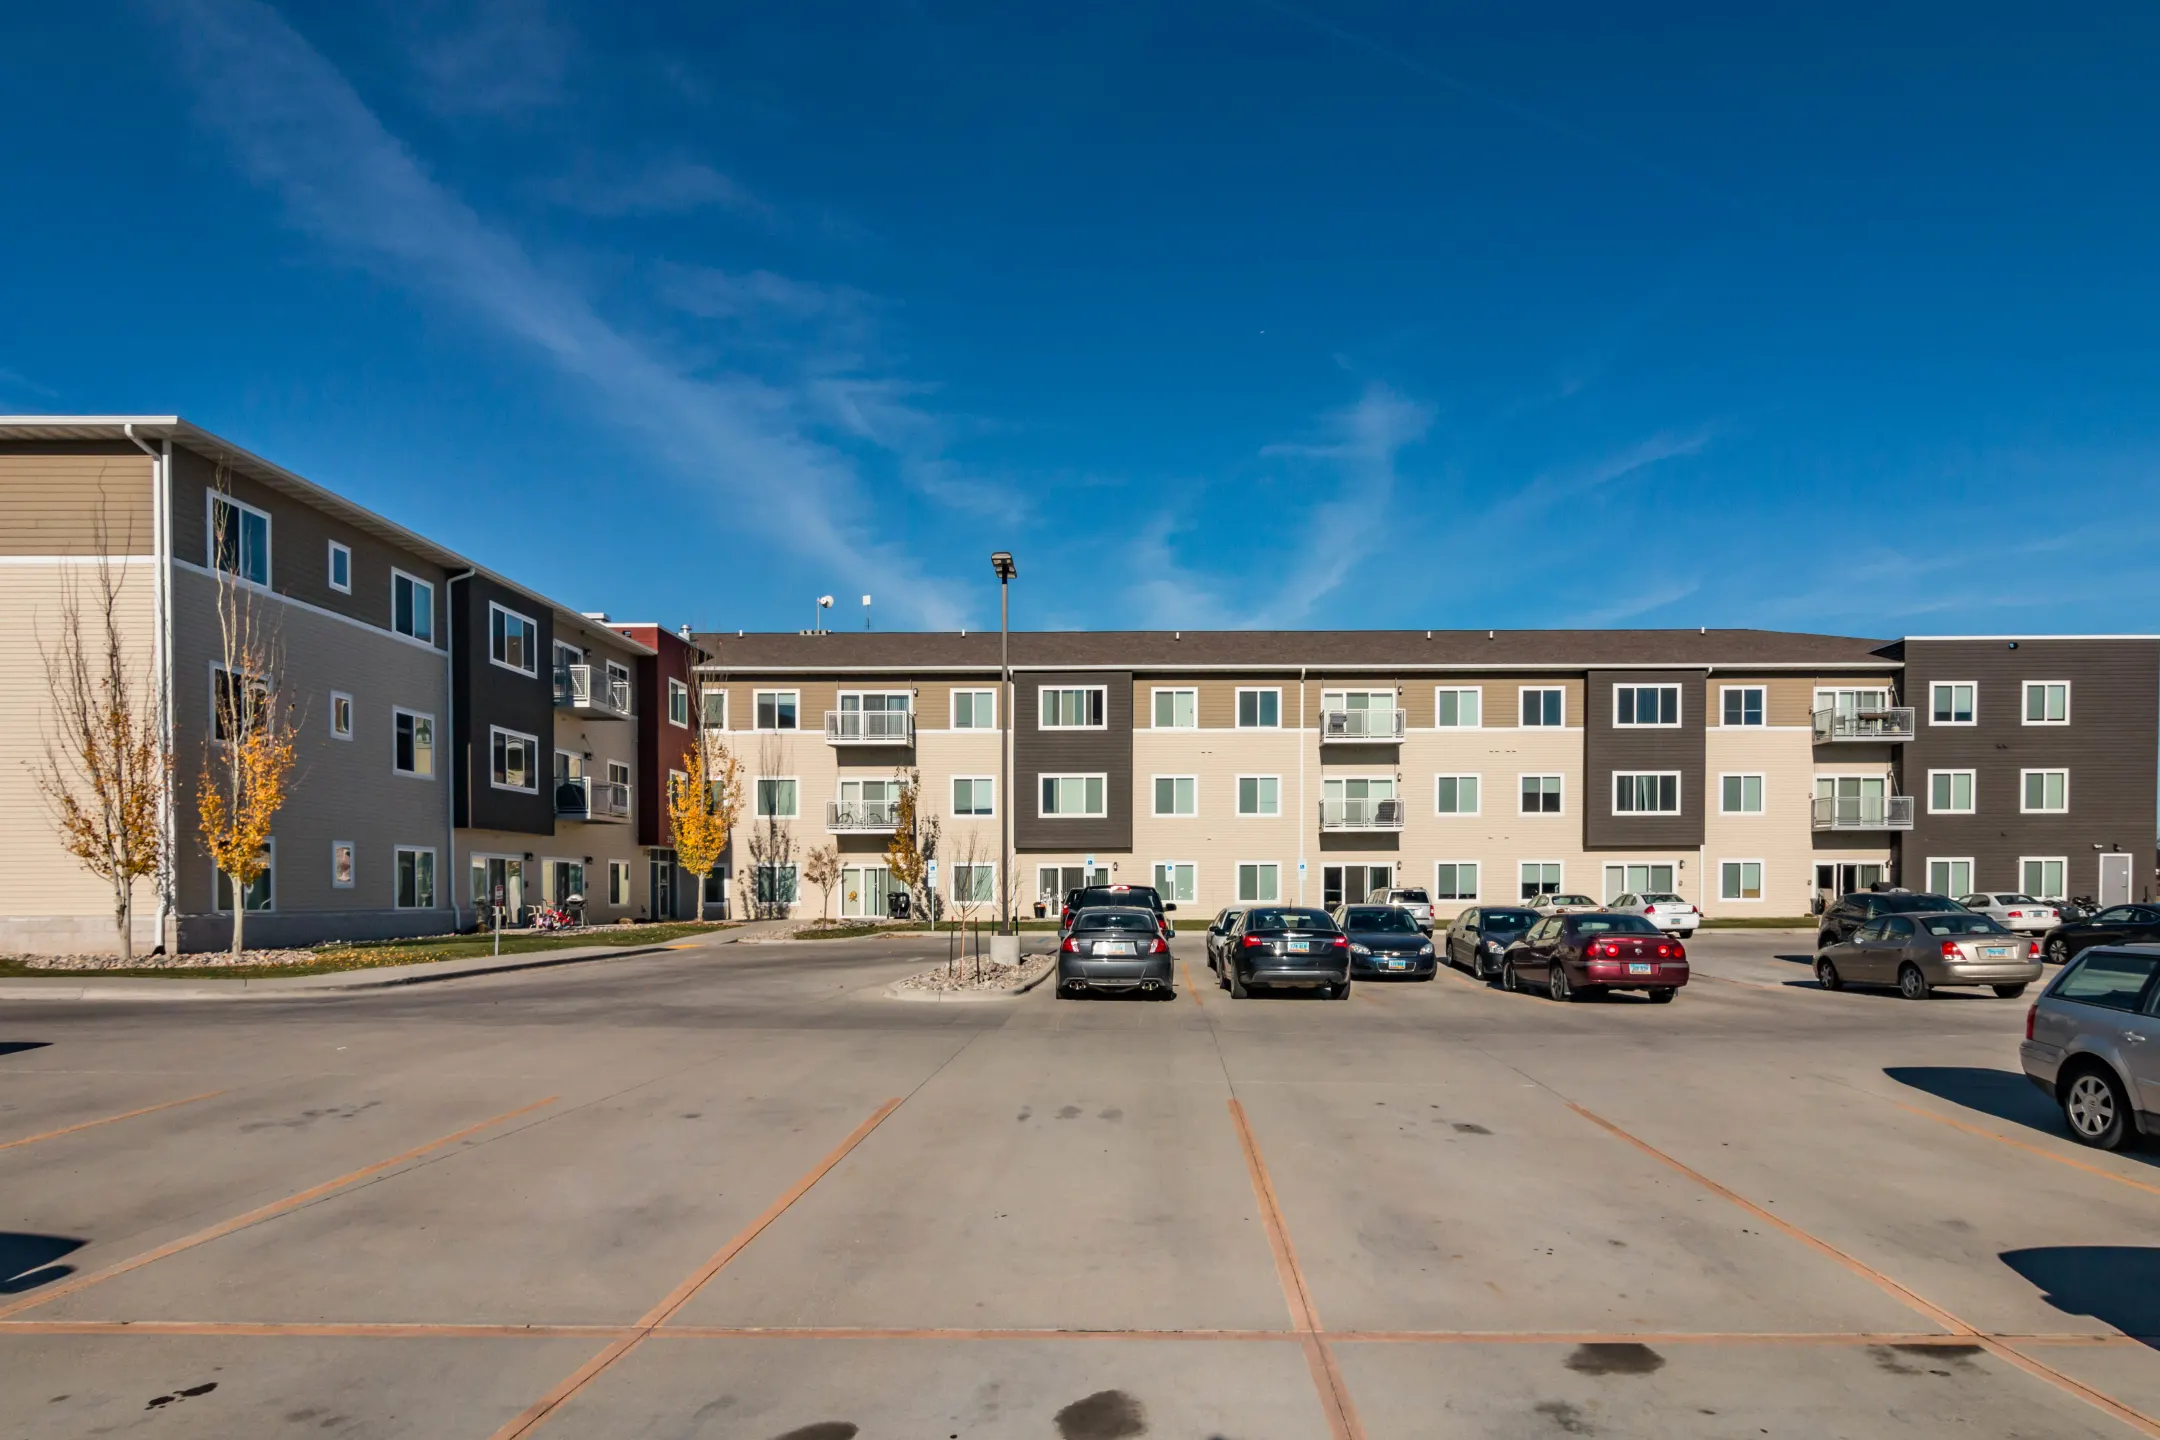 Building - Mallview Apartments - Grand Forks, ND